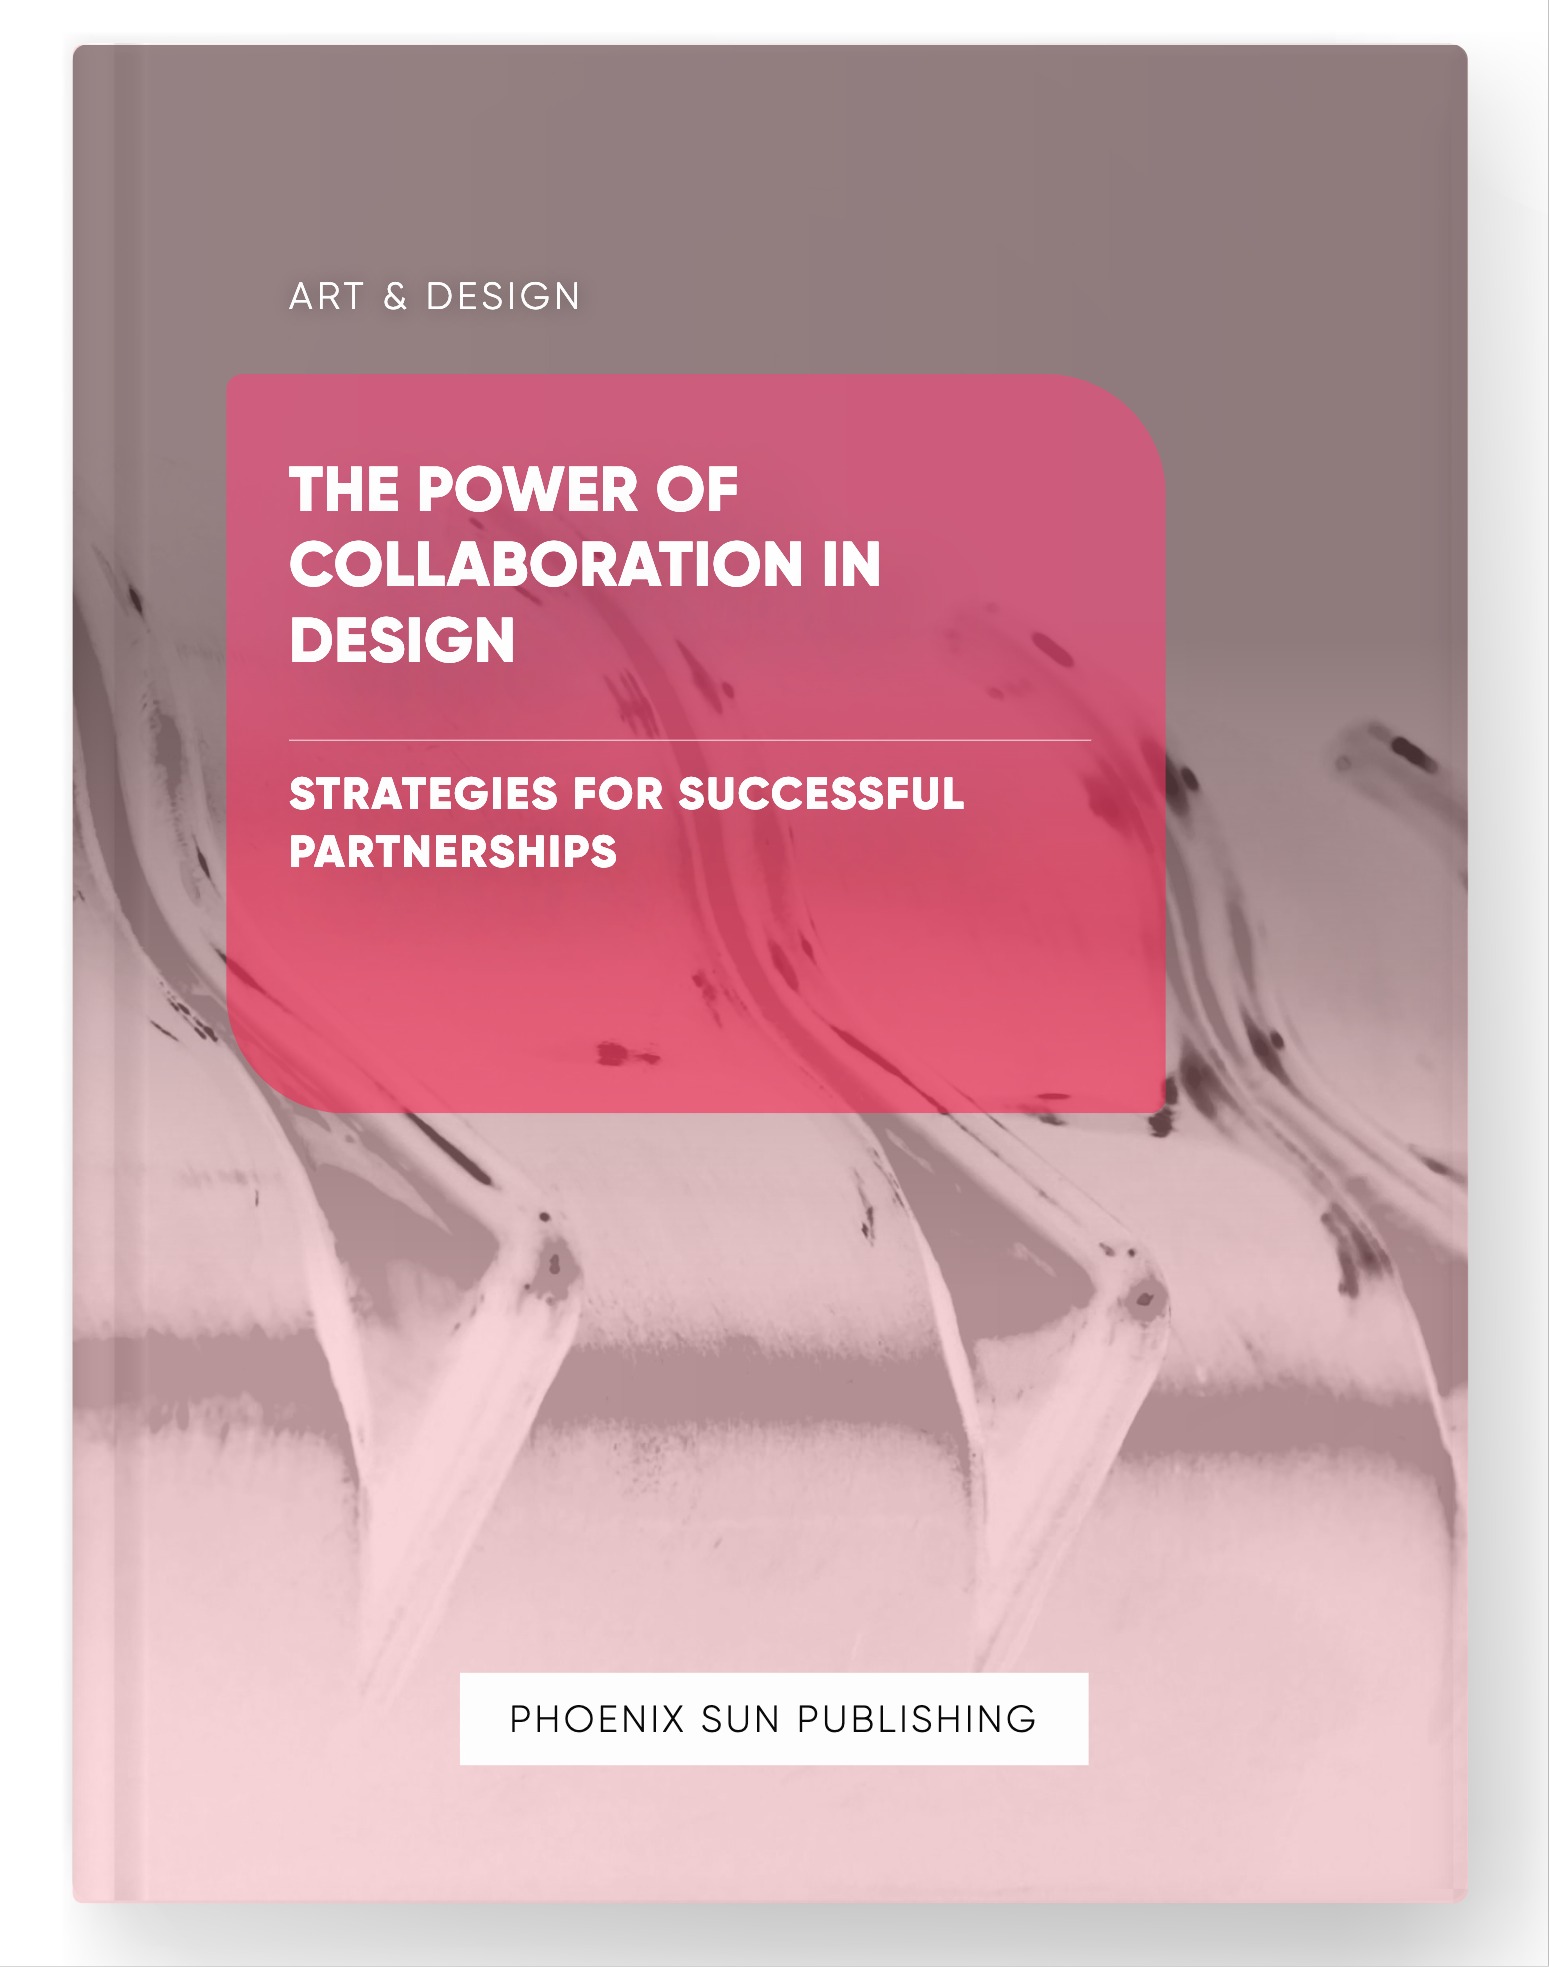 The Power of Collaboration in Design – Strategies for Successful Partnerships